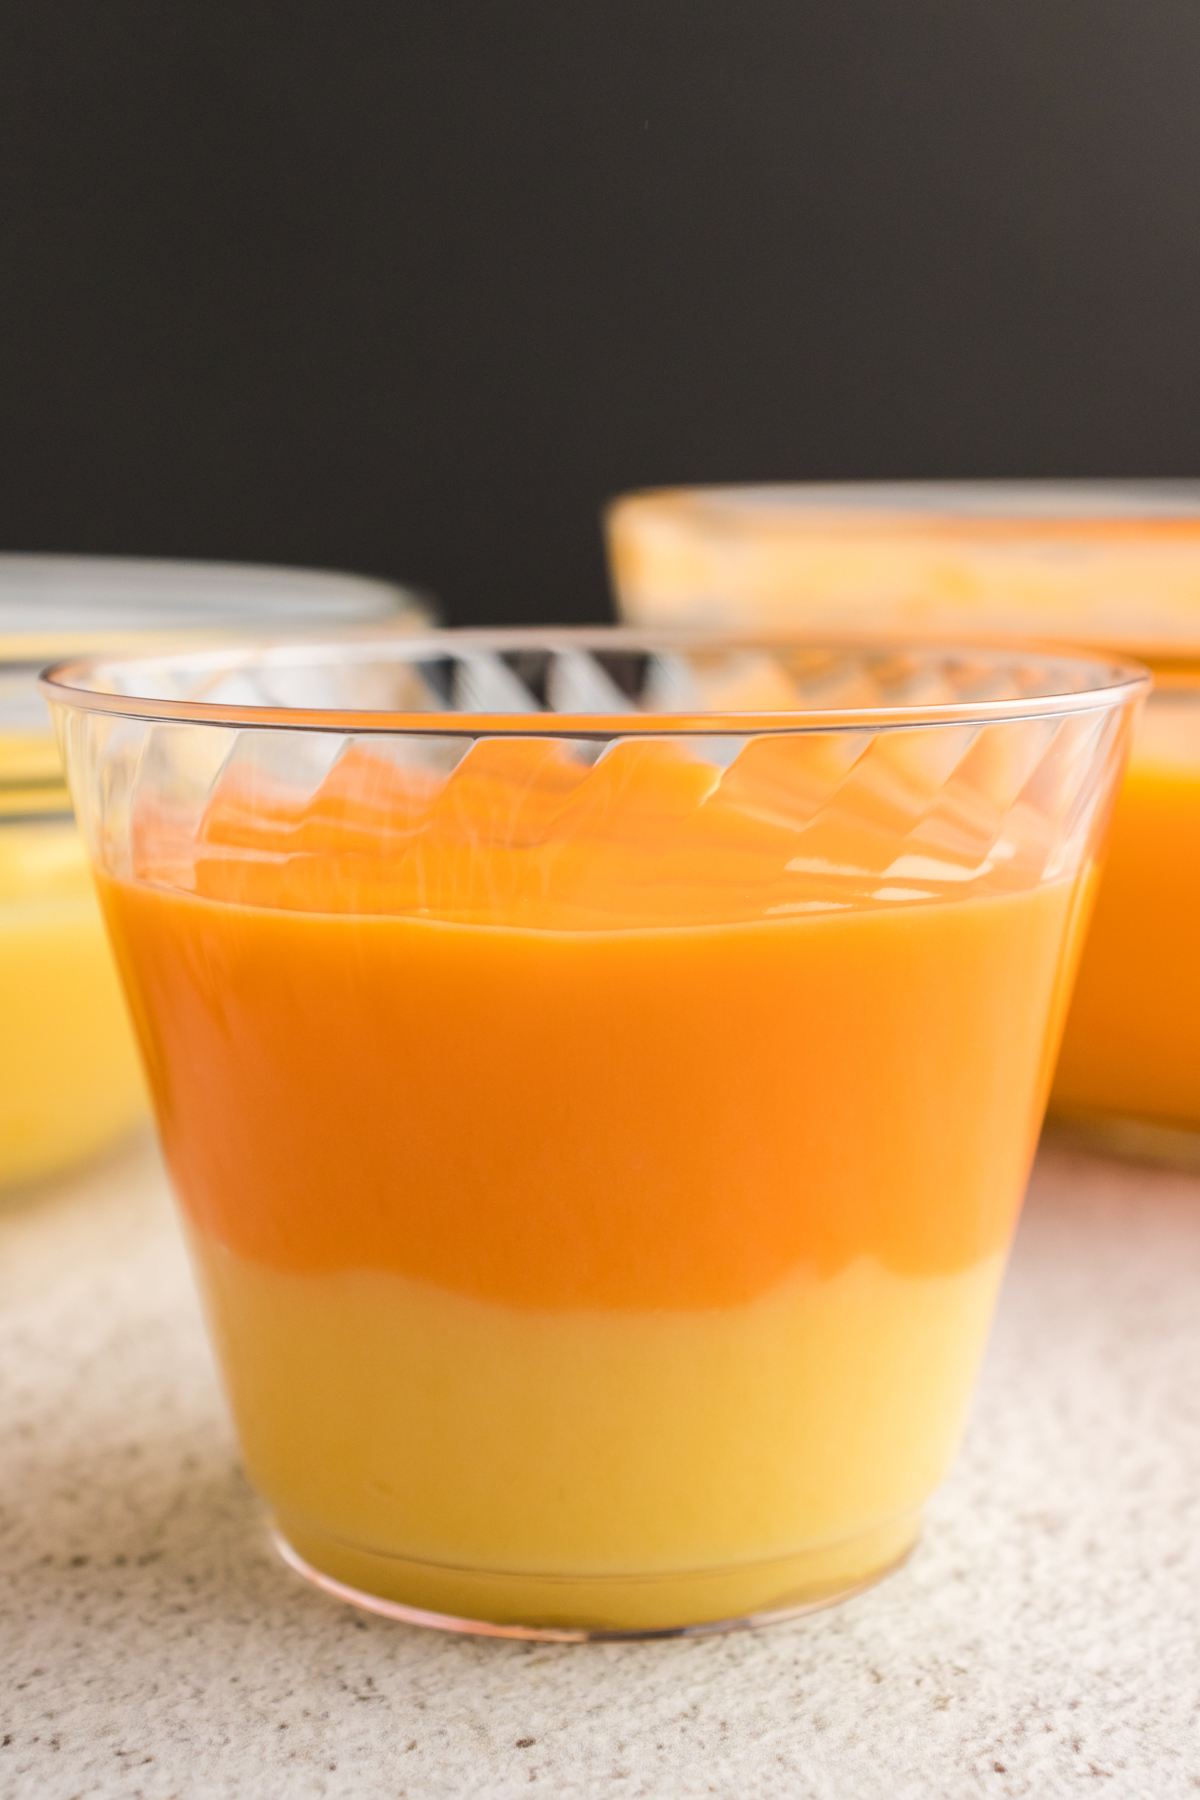 yellow and orange pudding in a plastic cup